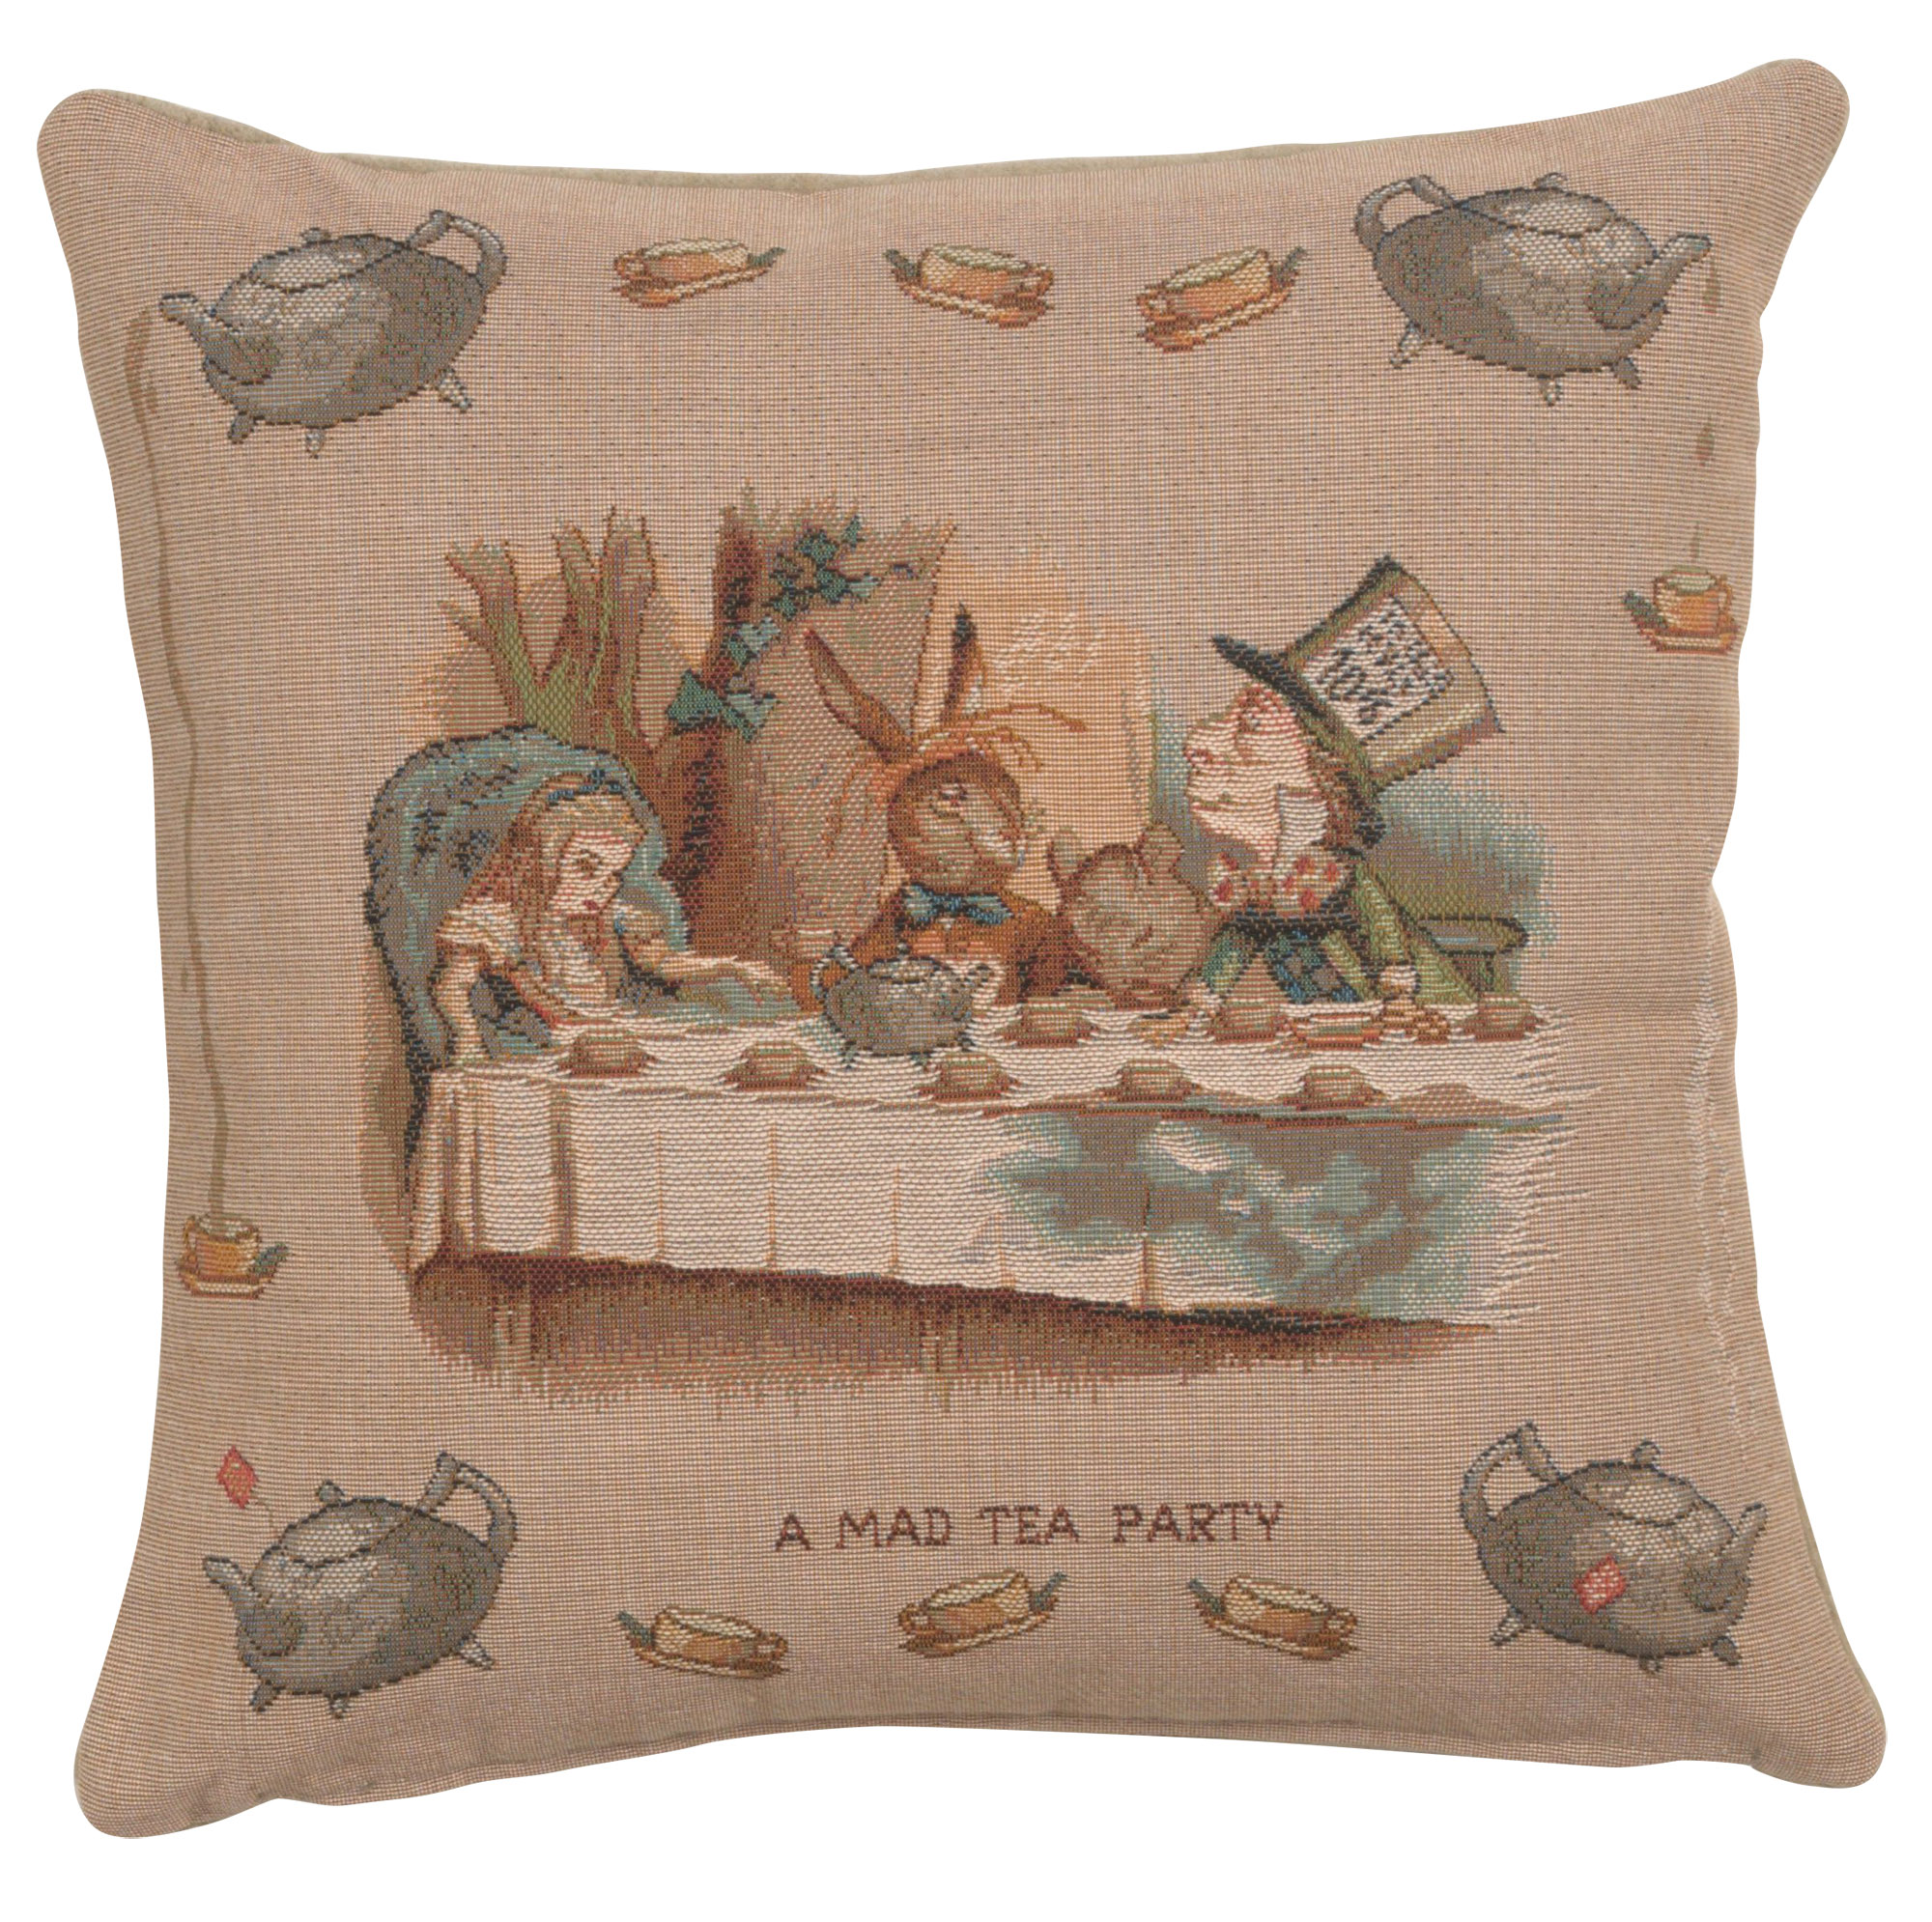 Throw Pillow Cover – Alice in Wonderland Tea Party - Tapestry Cushion 14x14 in